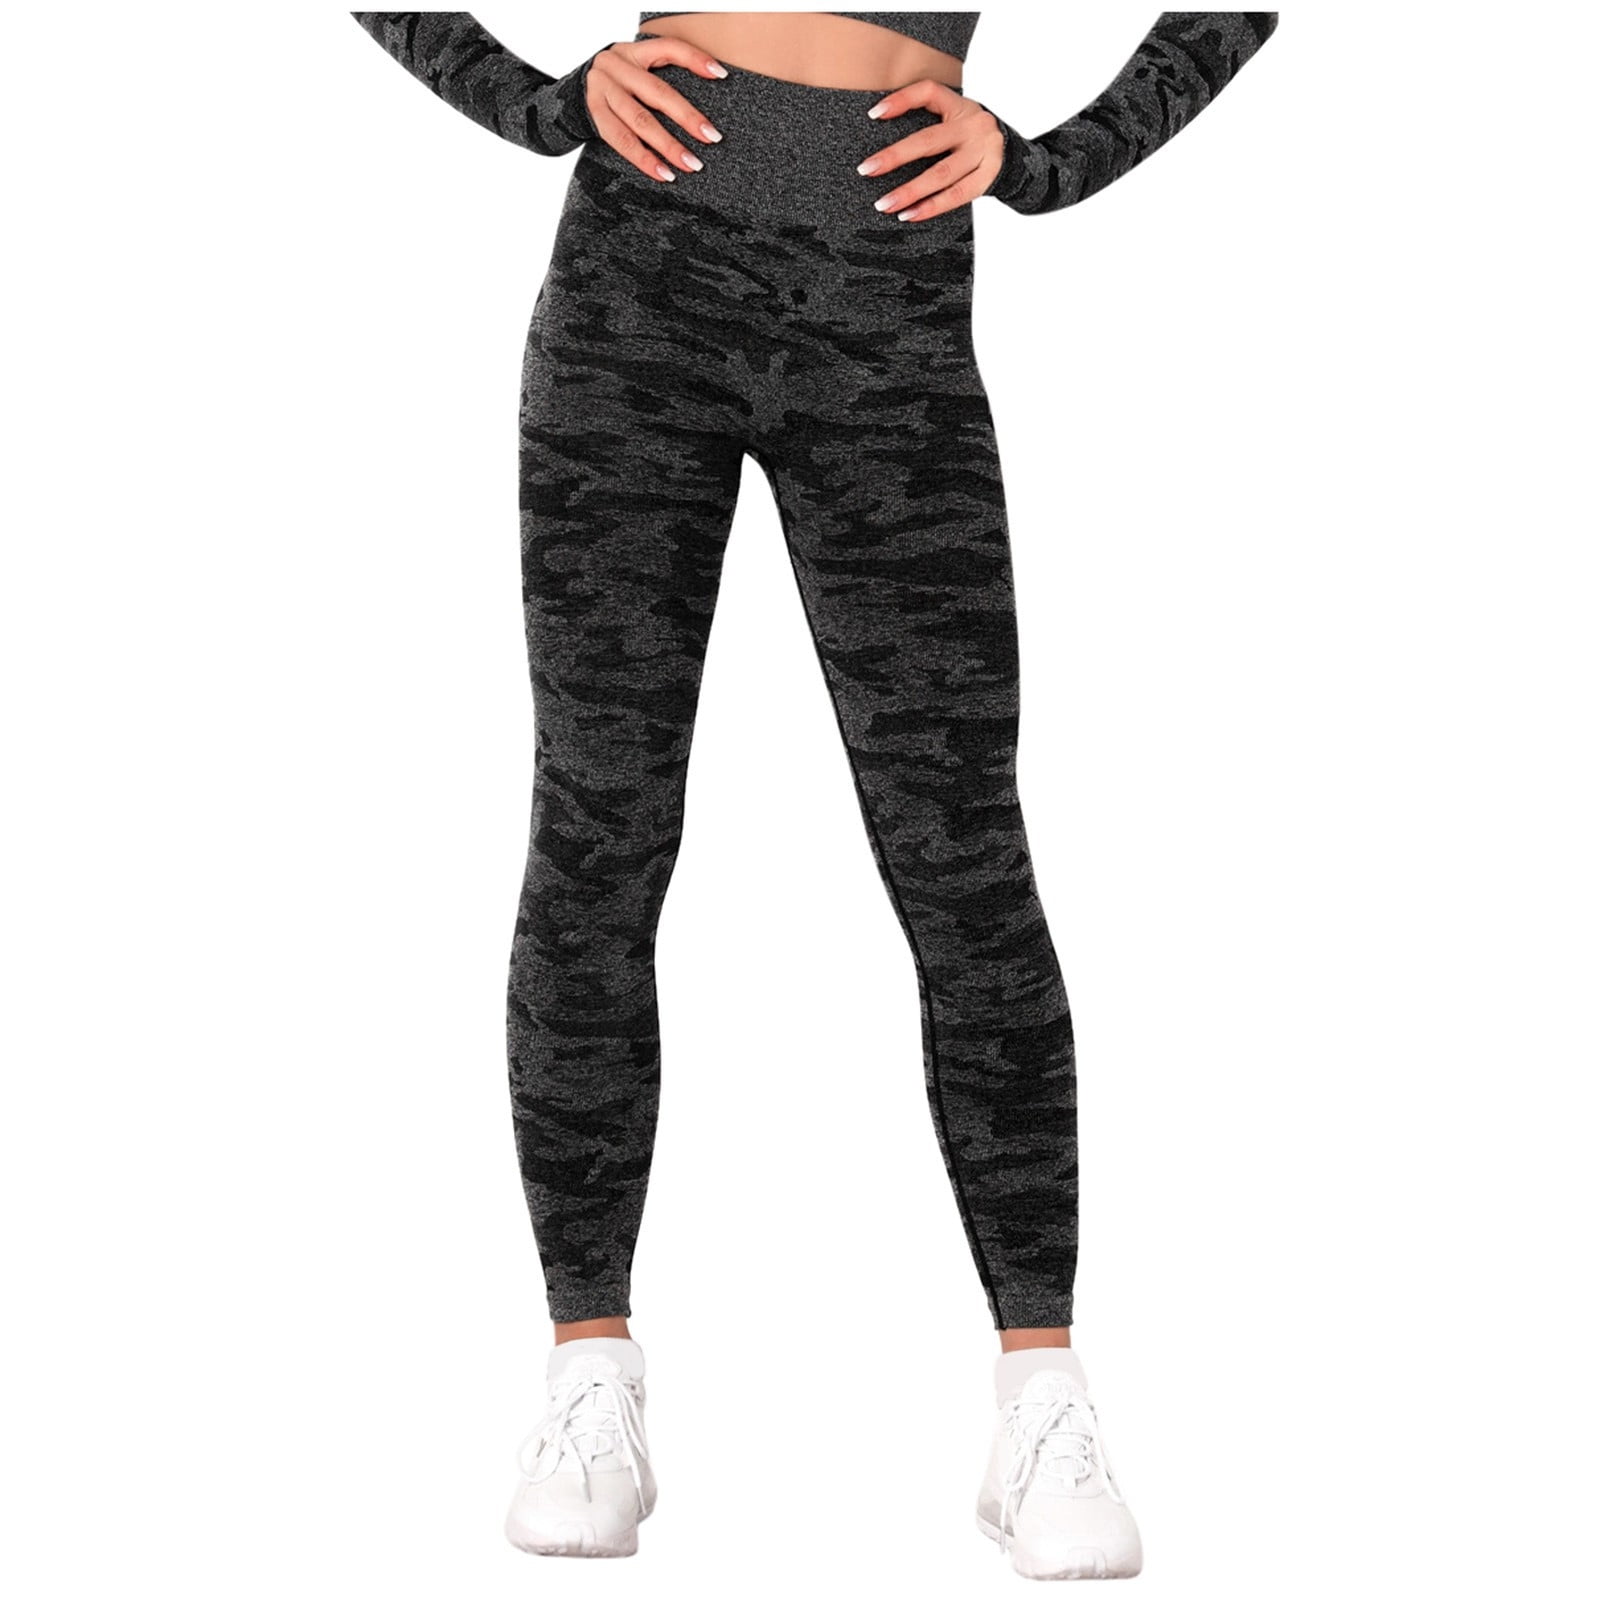 Womens Camo Workout Yoga Leggings High Waisted Nylon Stretch Jeggings Sweat  Pants Tummy Control Cozy Sports Outfits 